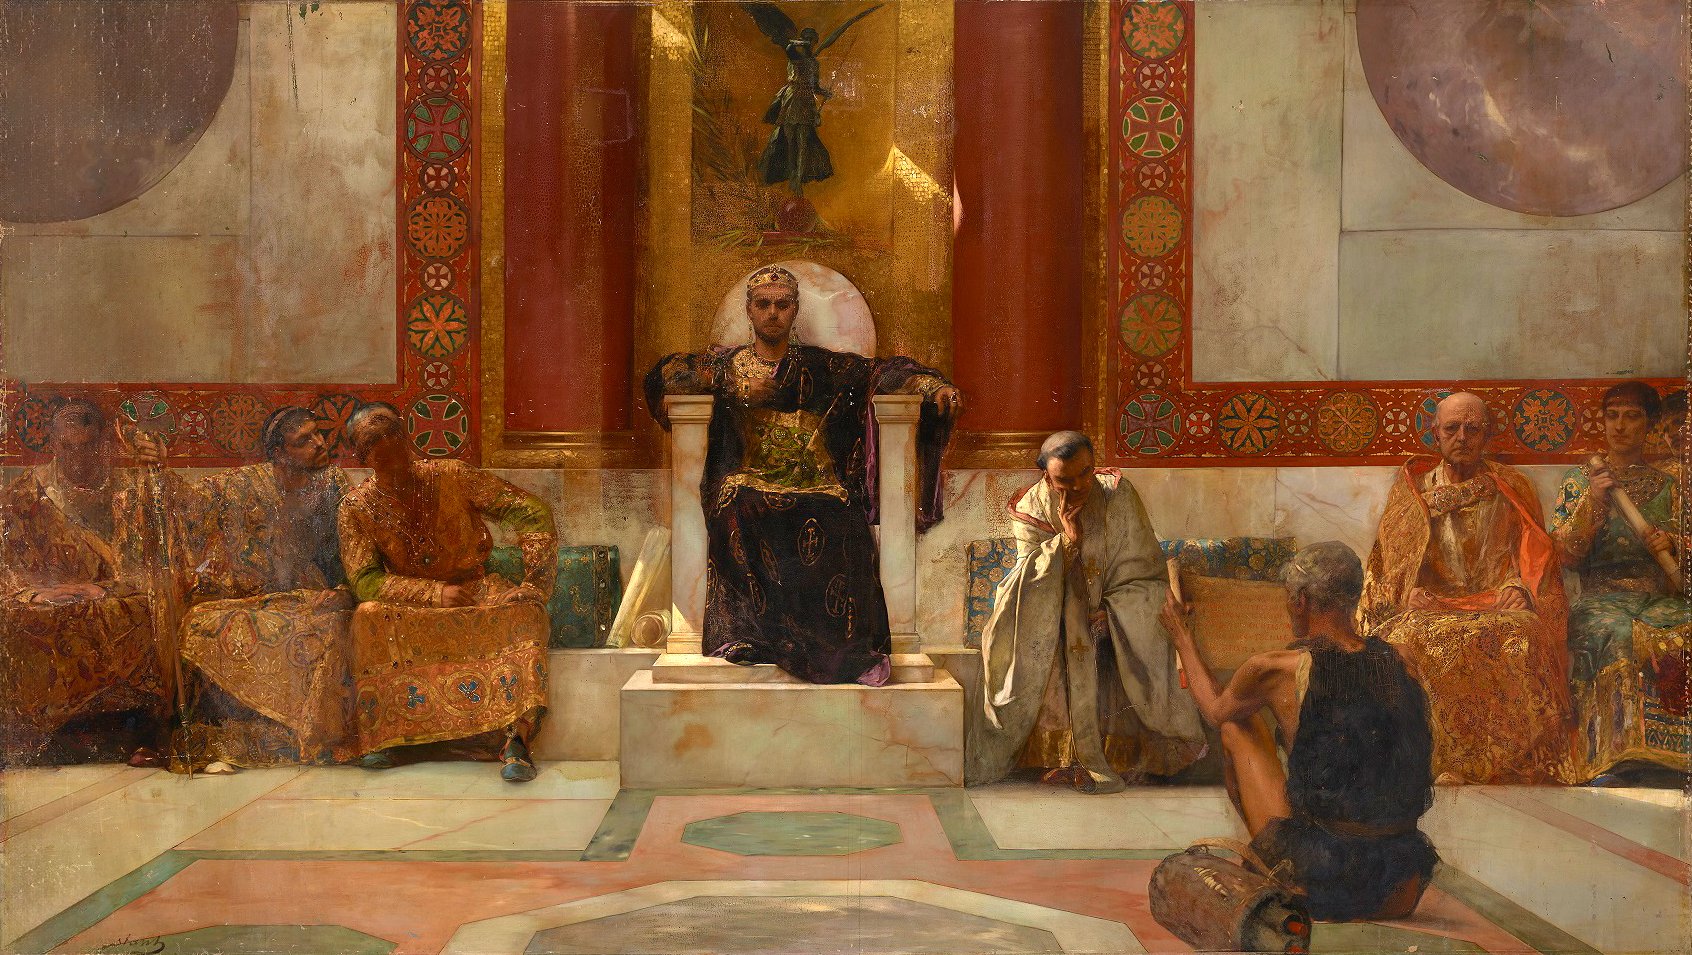 Justinian I sitting on the throne, wearing a crown. Next to him six advisors, three on each side. Another man is sitting on the floor in front of them, reading from a scroll.